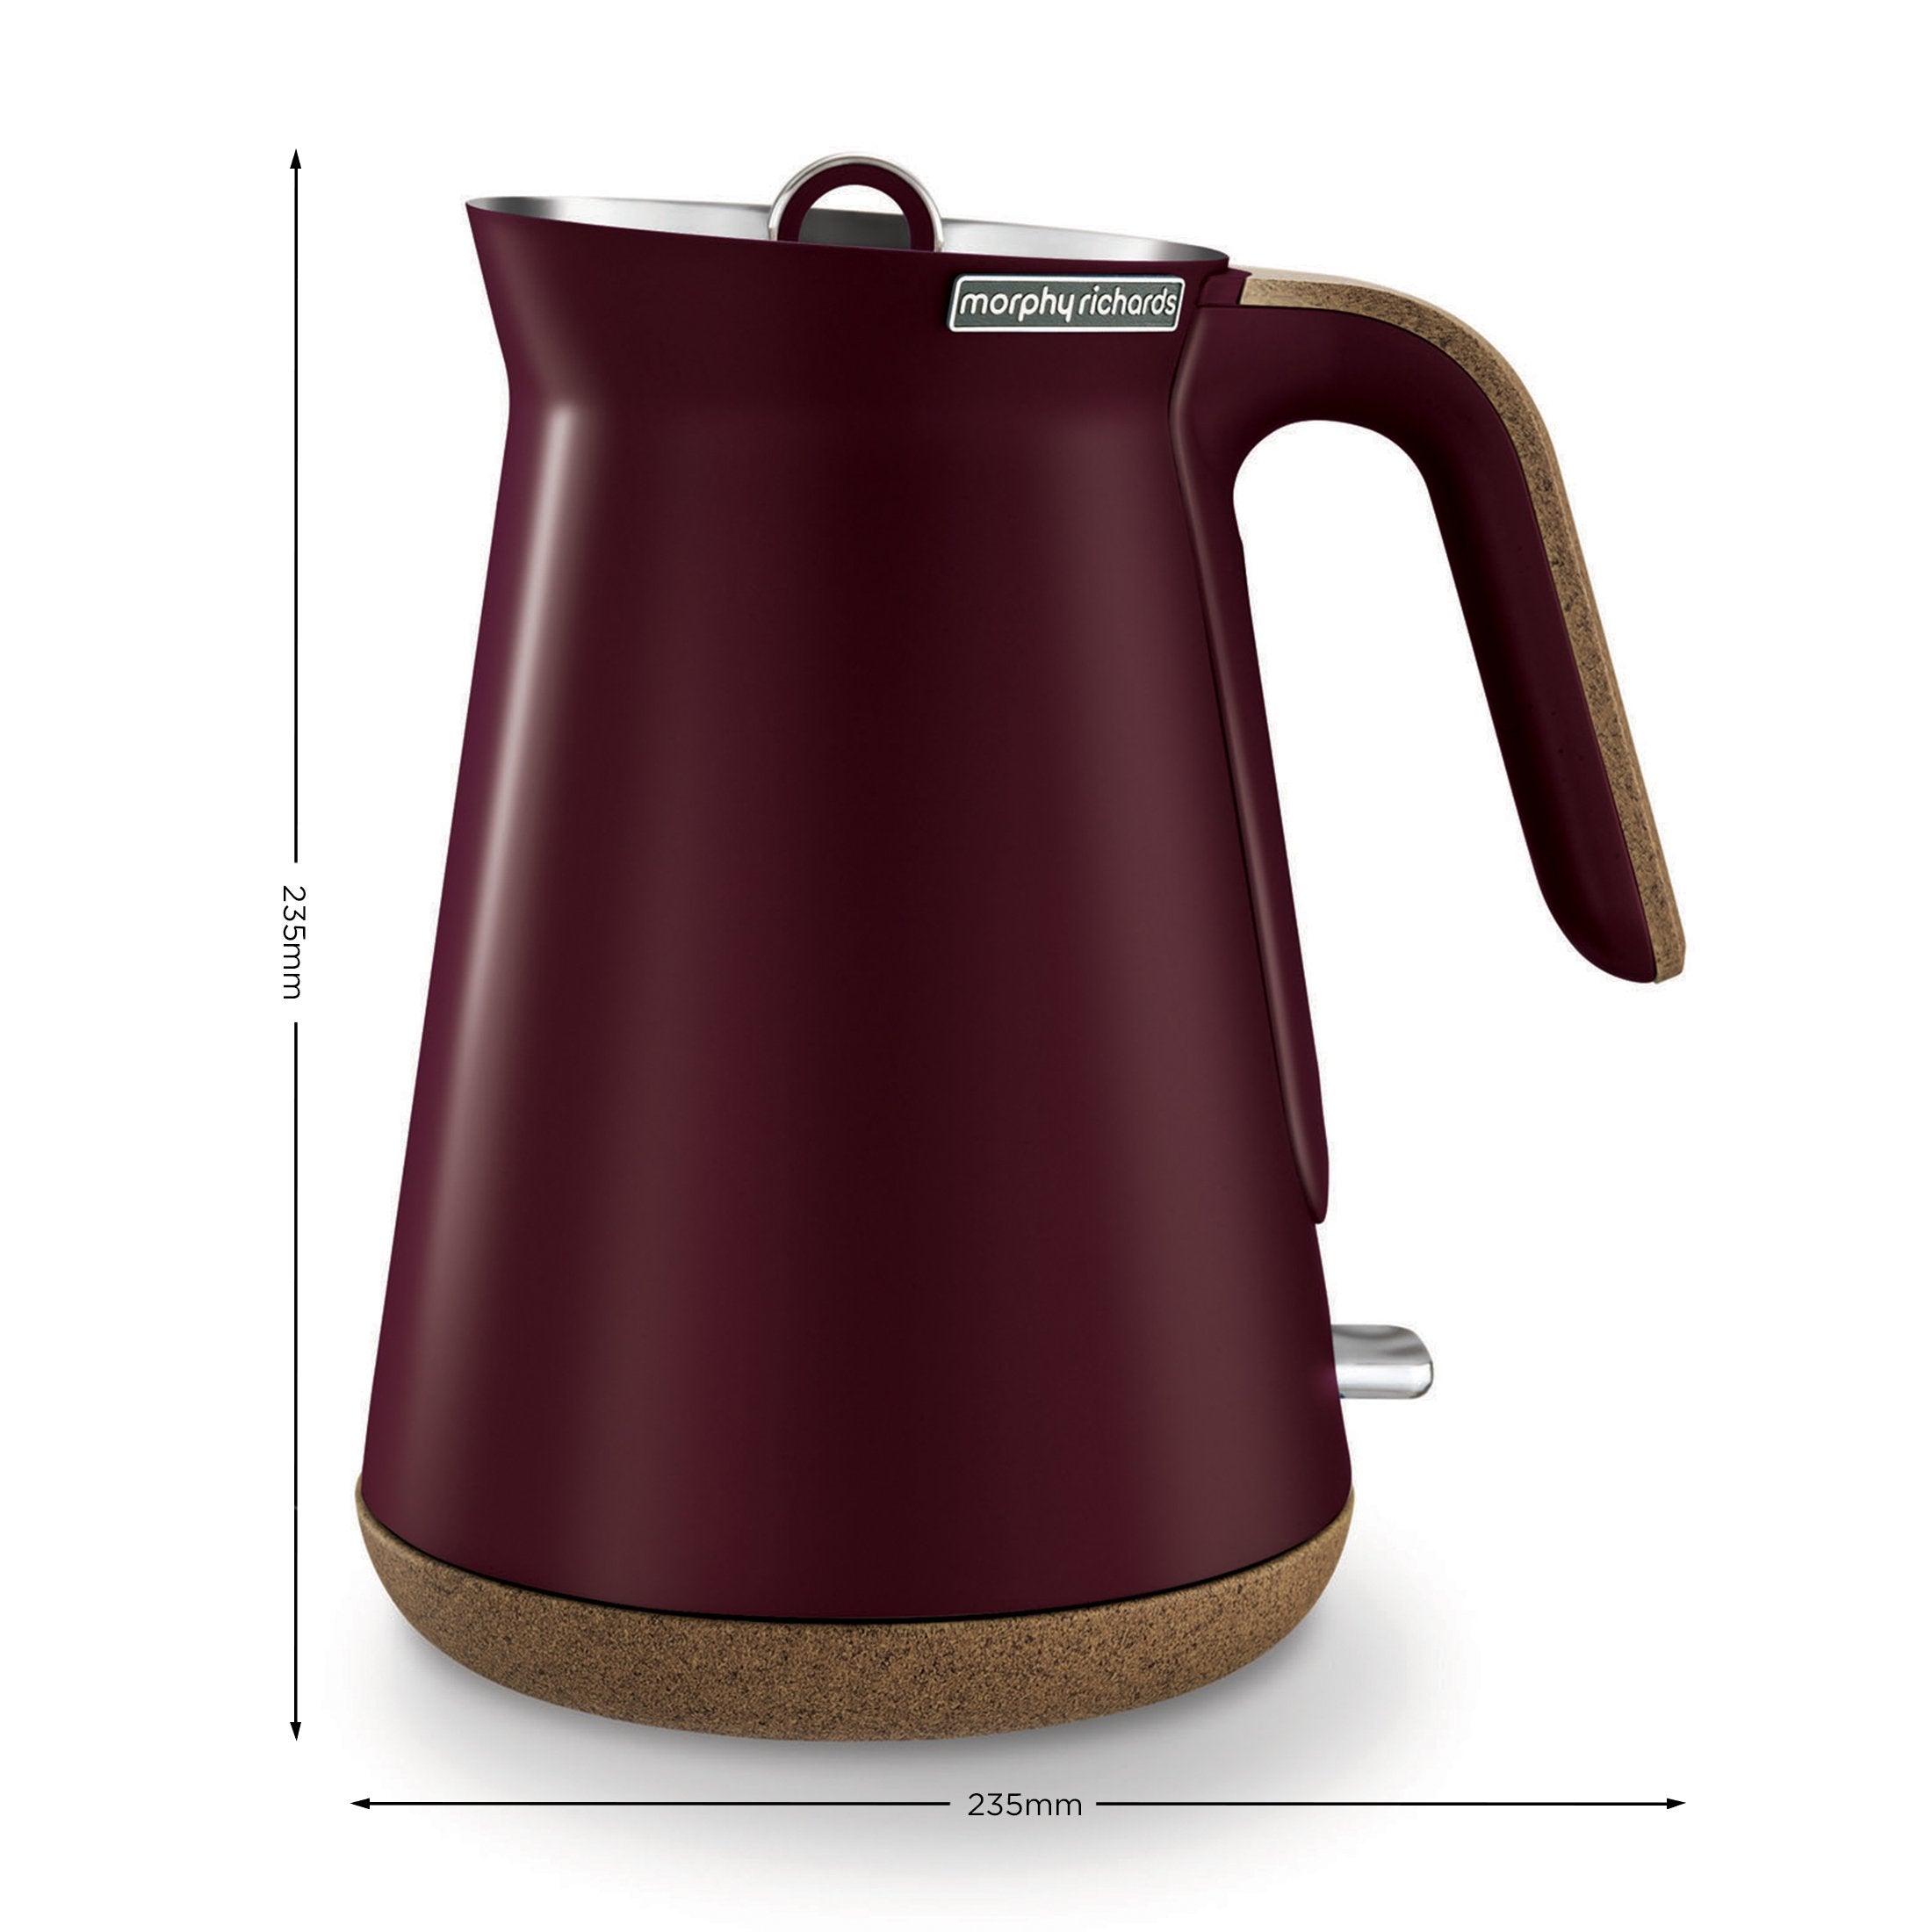 Morphy Richards 1.5L Aspect Kettle - Maroon with Cork-Effect Trim - SILBERSHELL